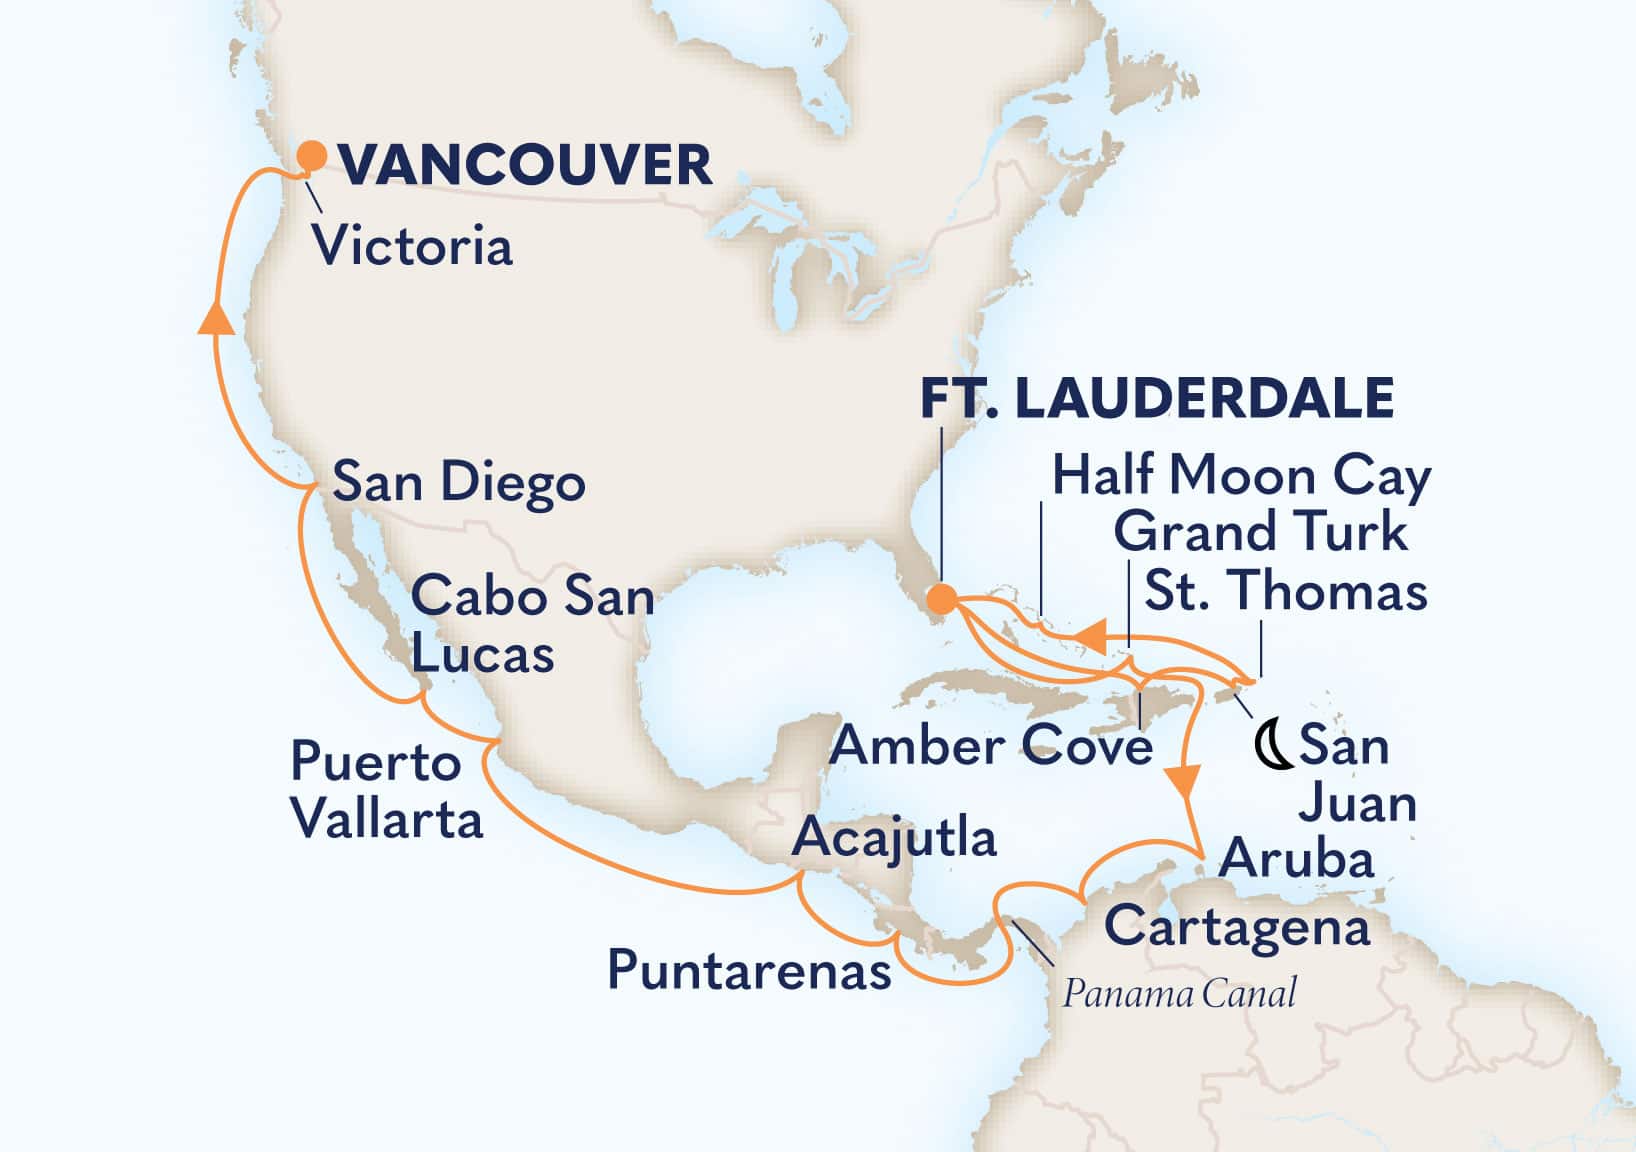 28-Day Eastern Caribbean & Panama Canal Itinerary Map